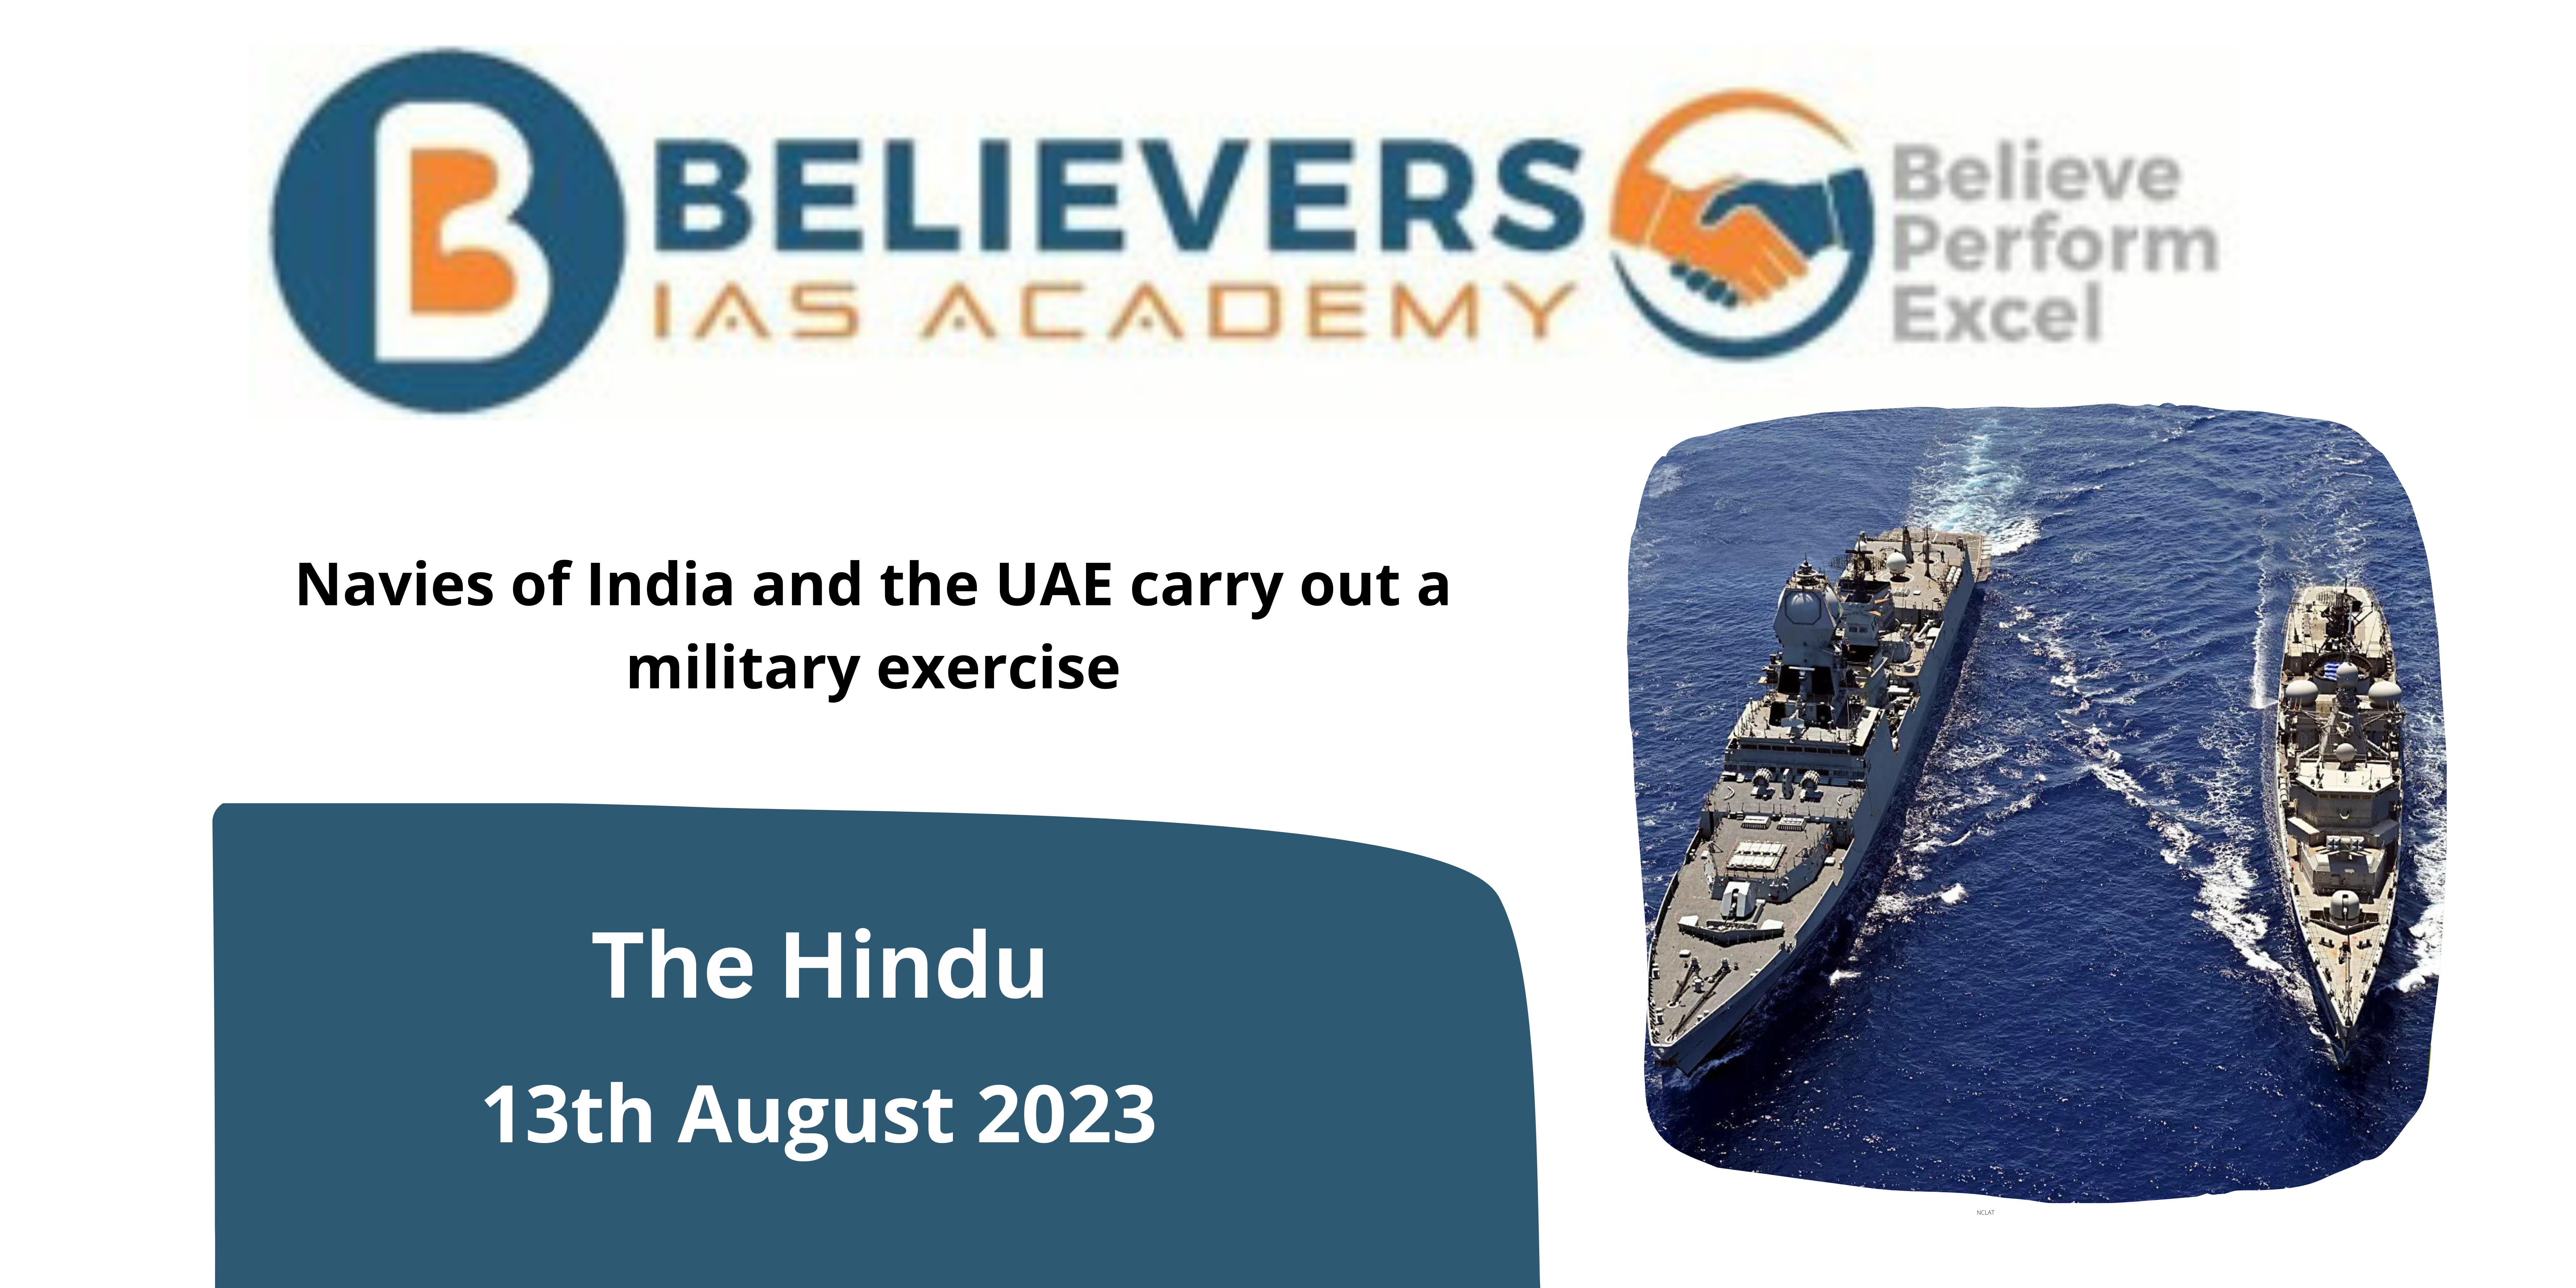 Navies of India and the UAE carry out a military exercise